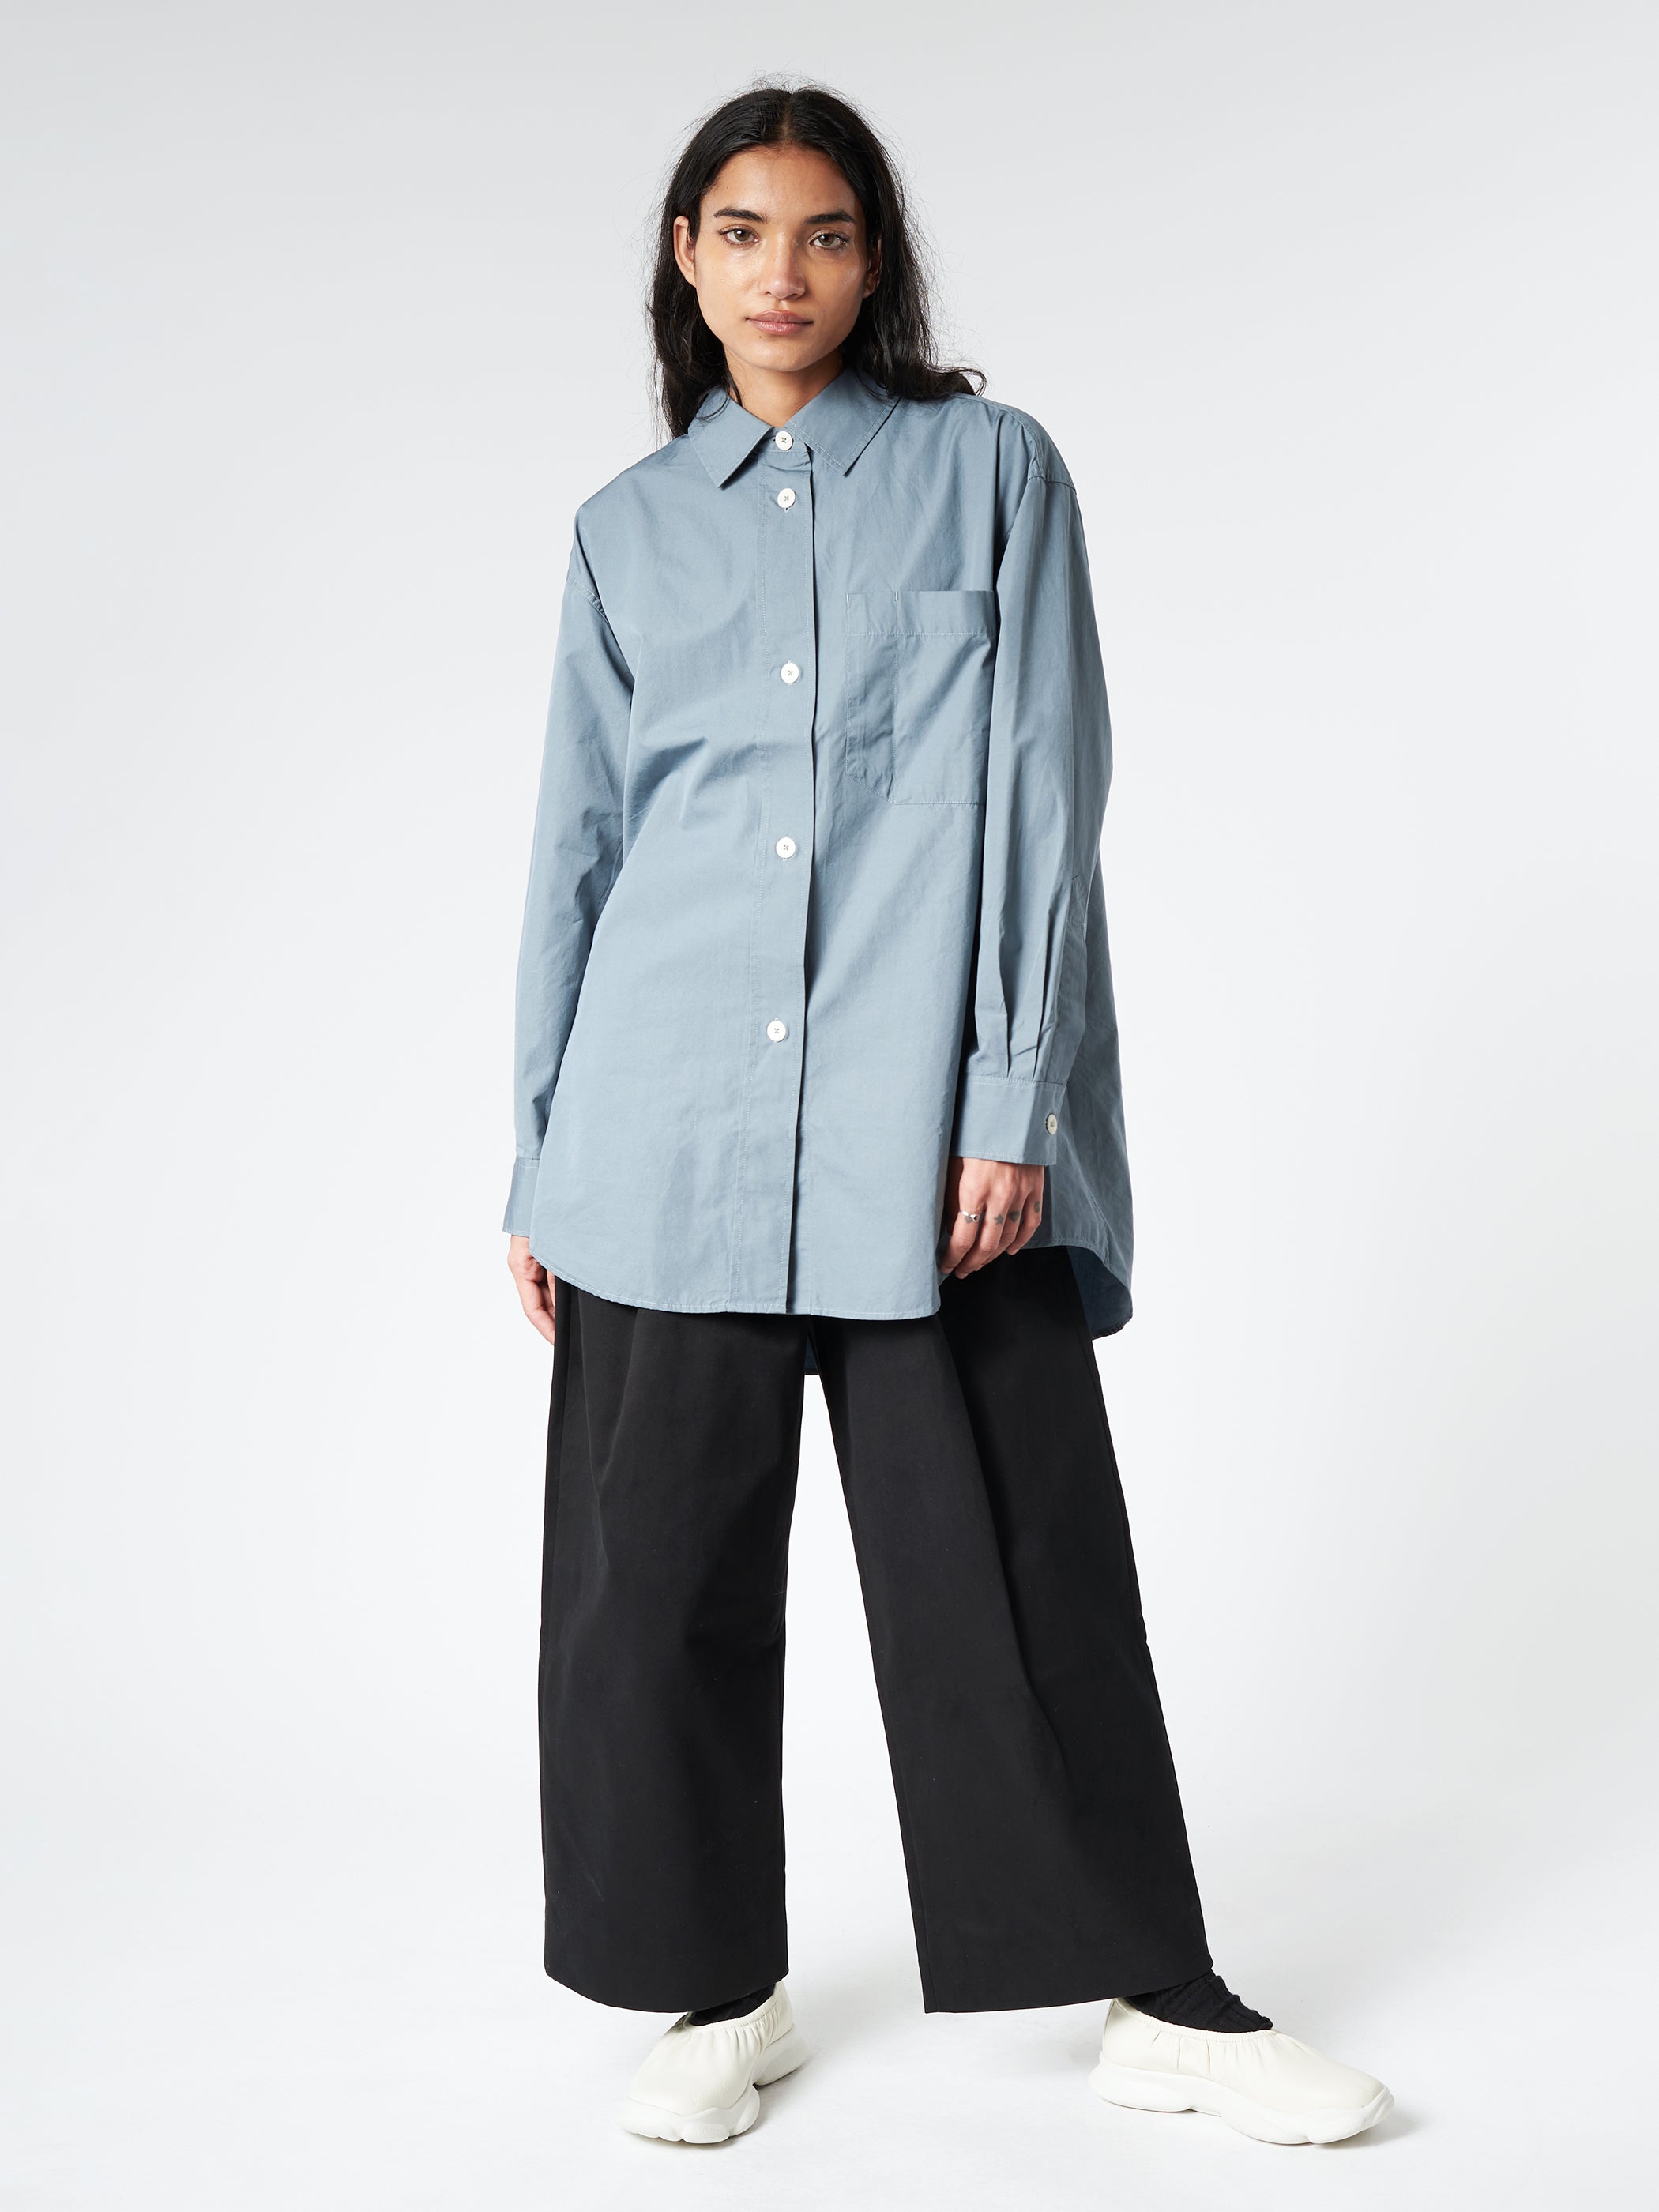 Margaret Howell - MHL Oversized Painters Shirt in Dusty Blue 